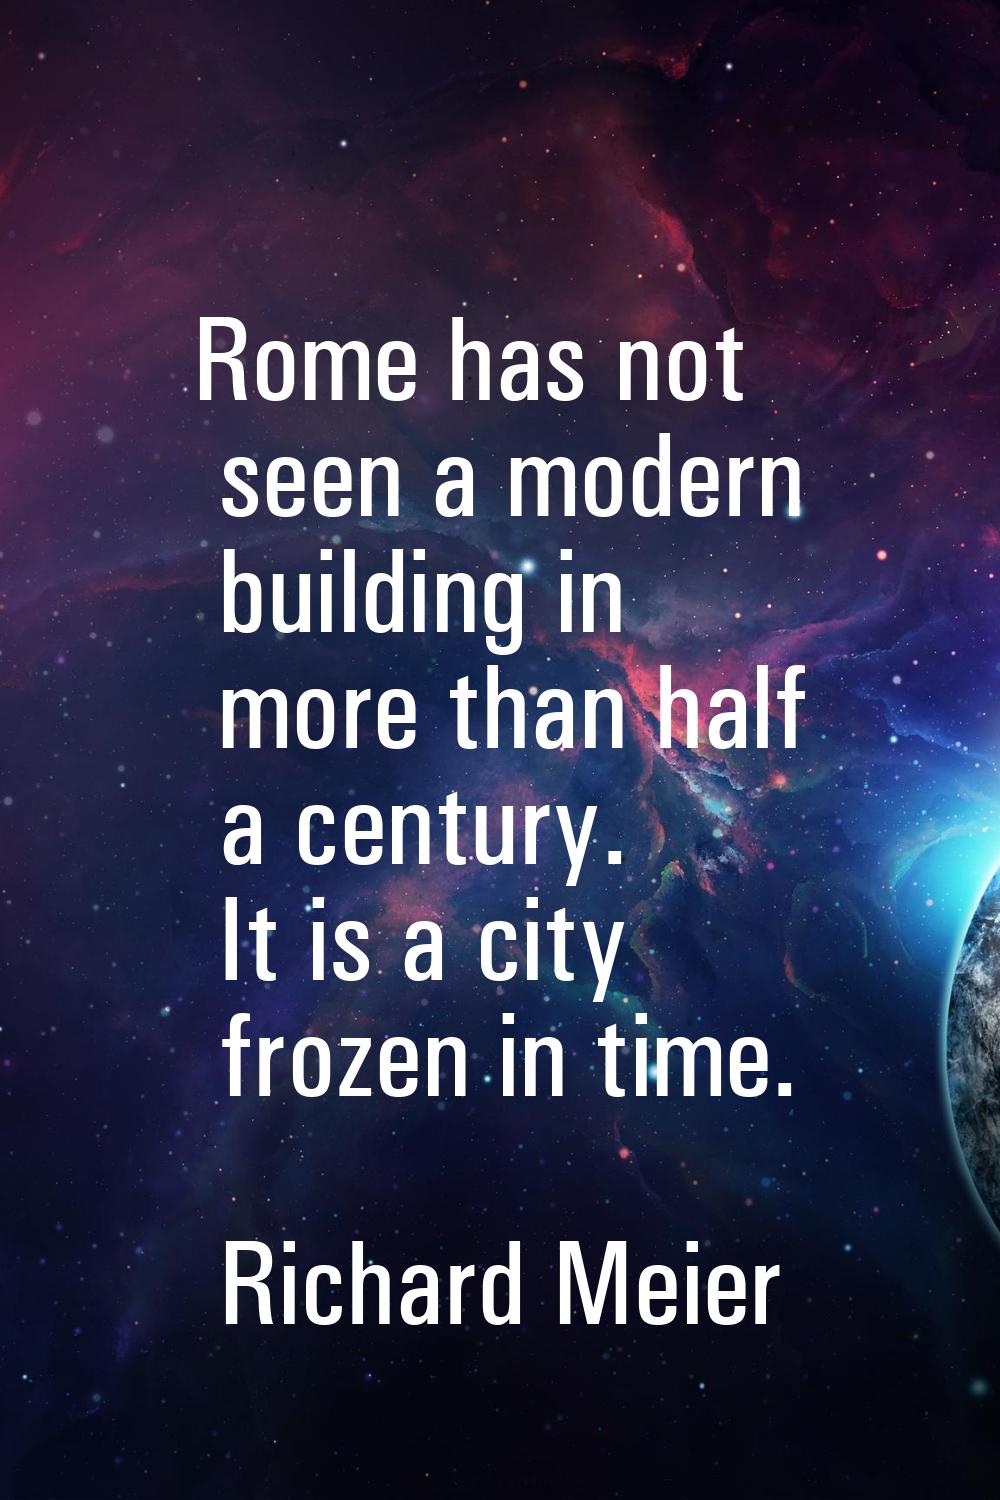 Rome has not seen a modern building in more than half a century. It is a city frozen in time.